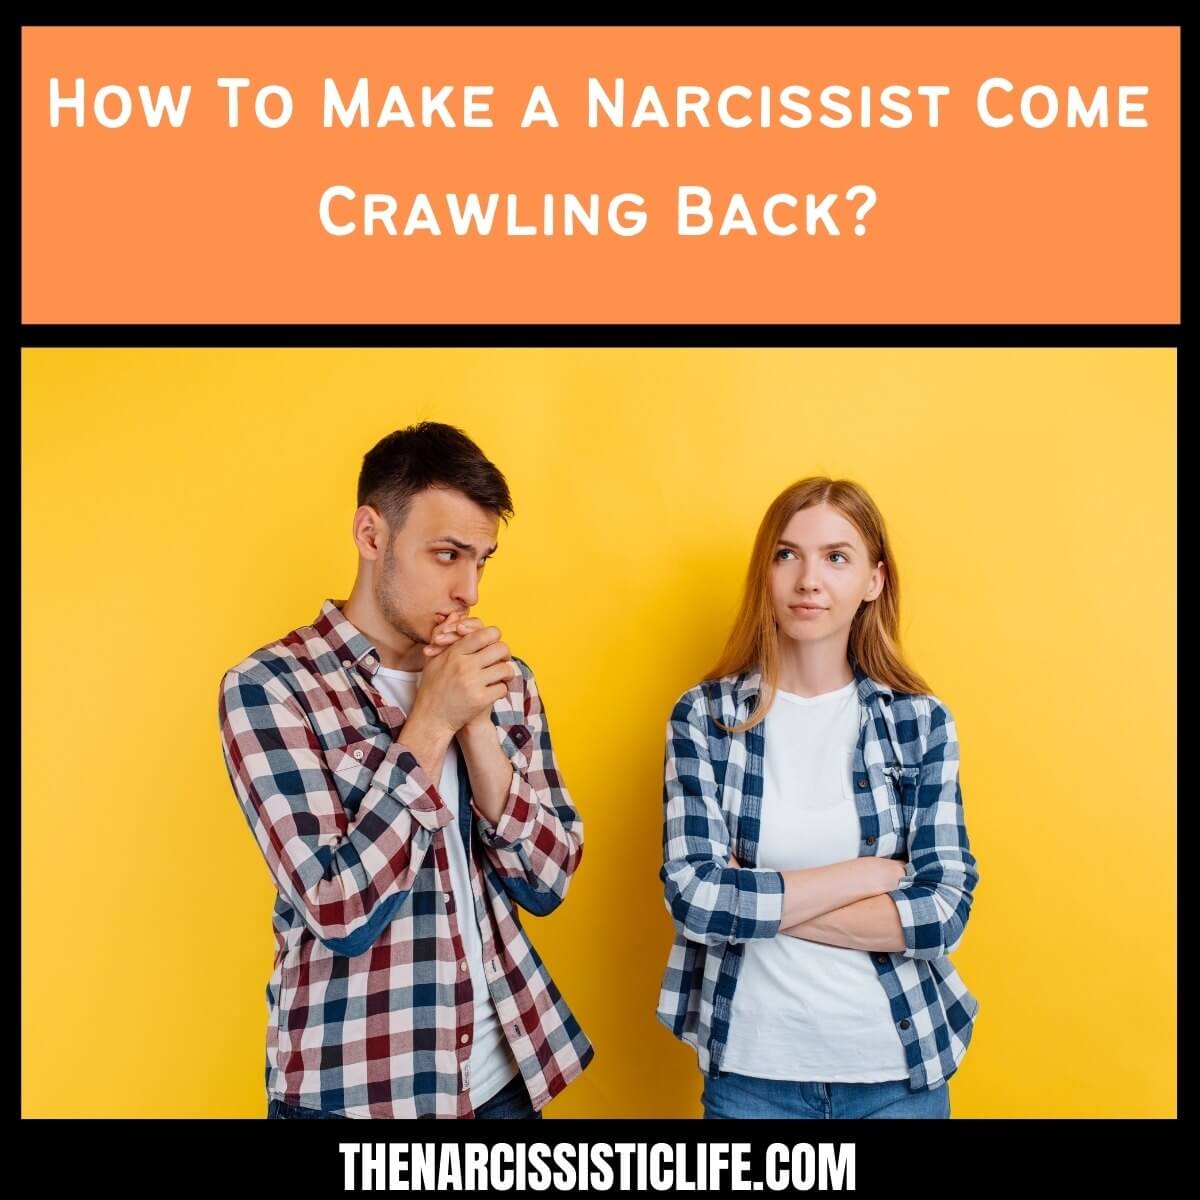 How To Make a Narcissist Come Crawling Back